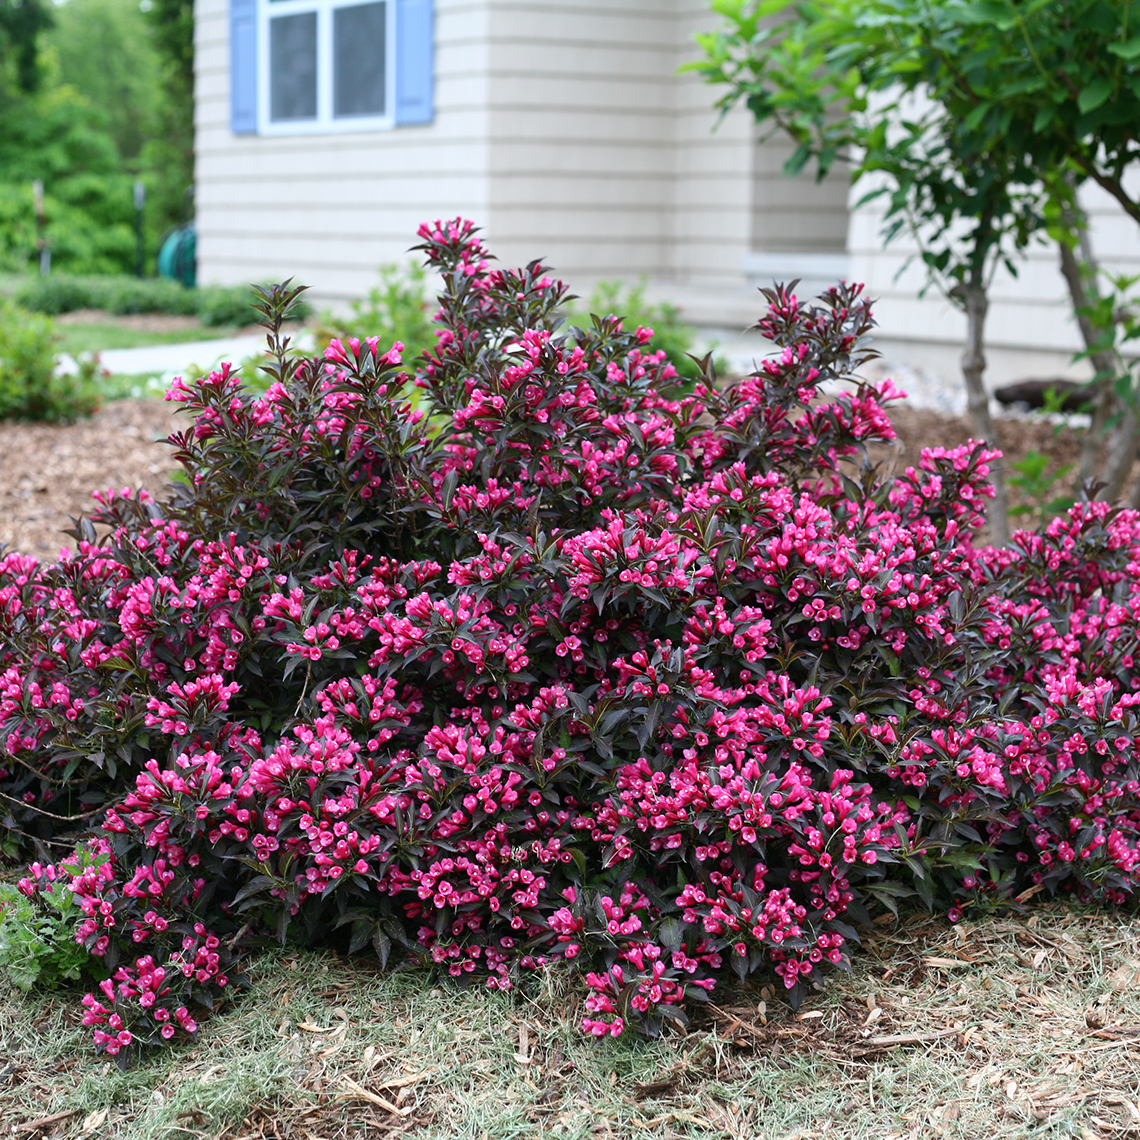 Spilled Wine weigela in full bloom in a landscape with a yellow house in the background